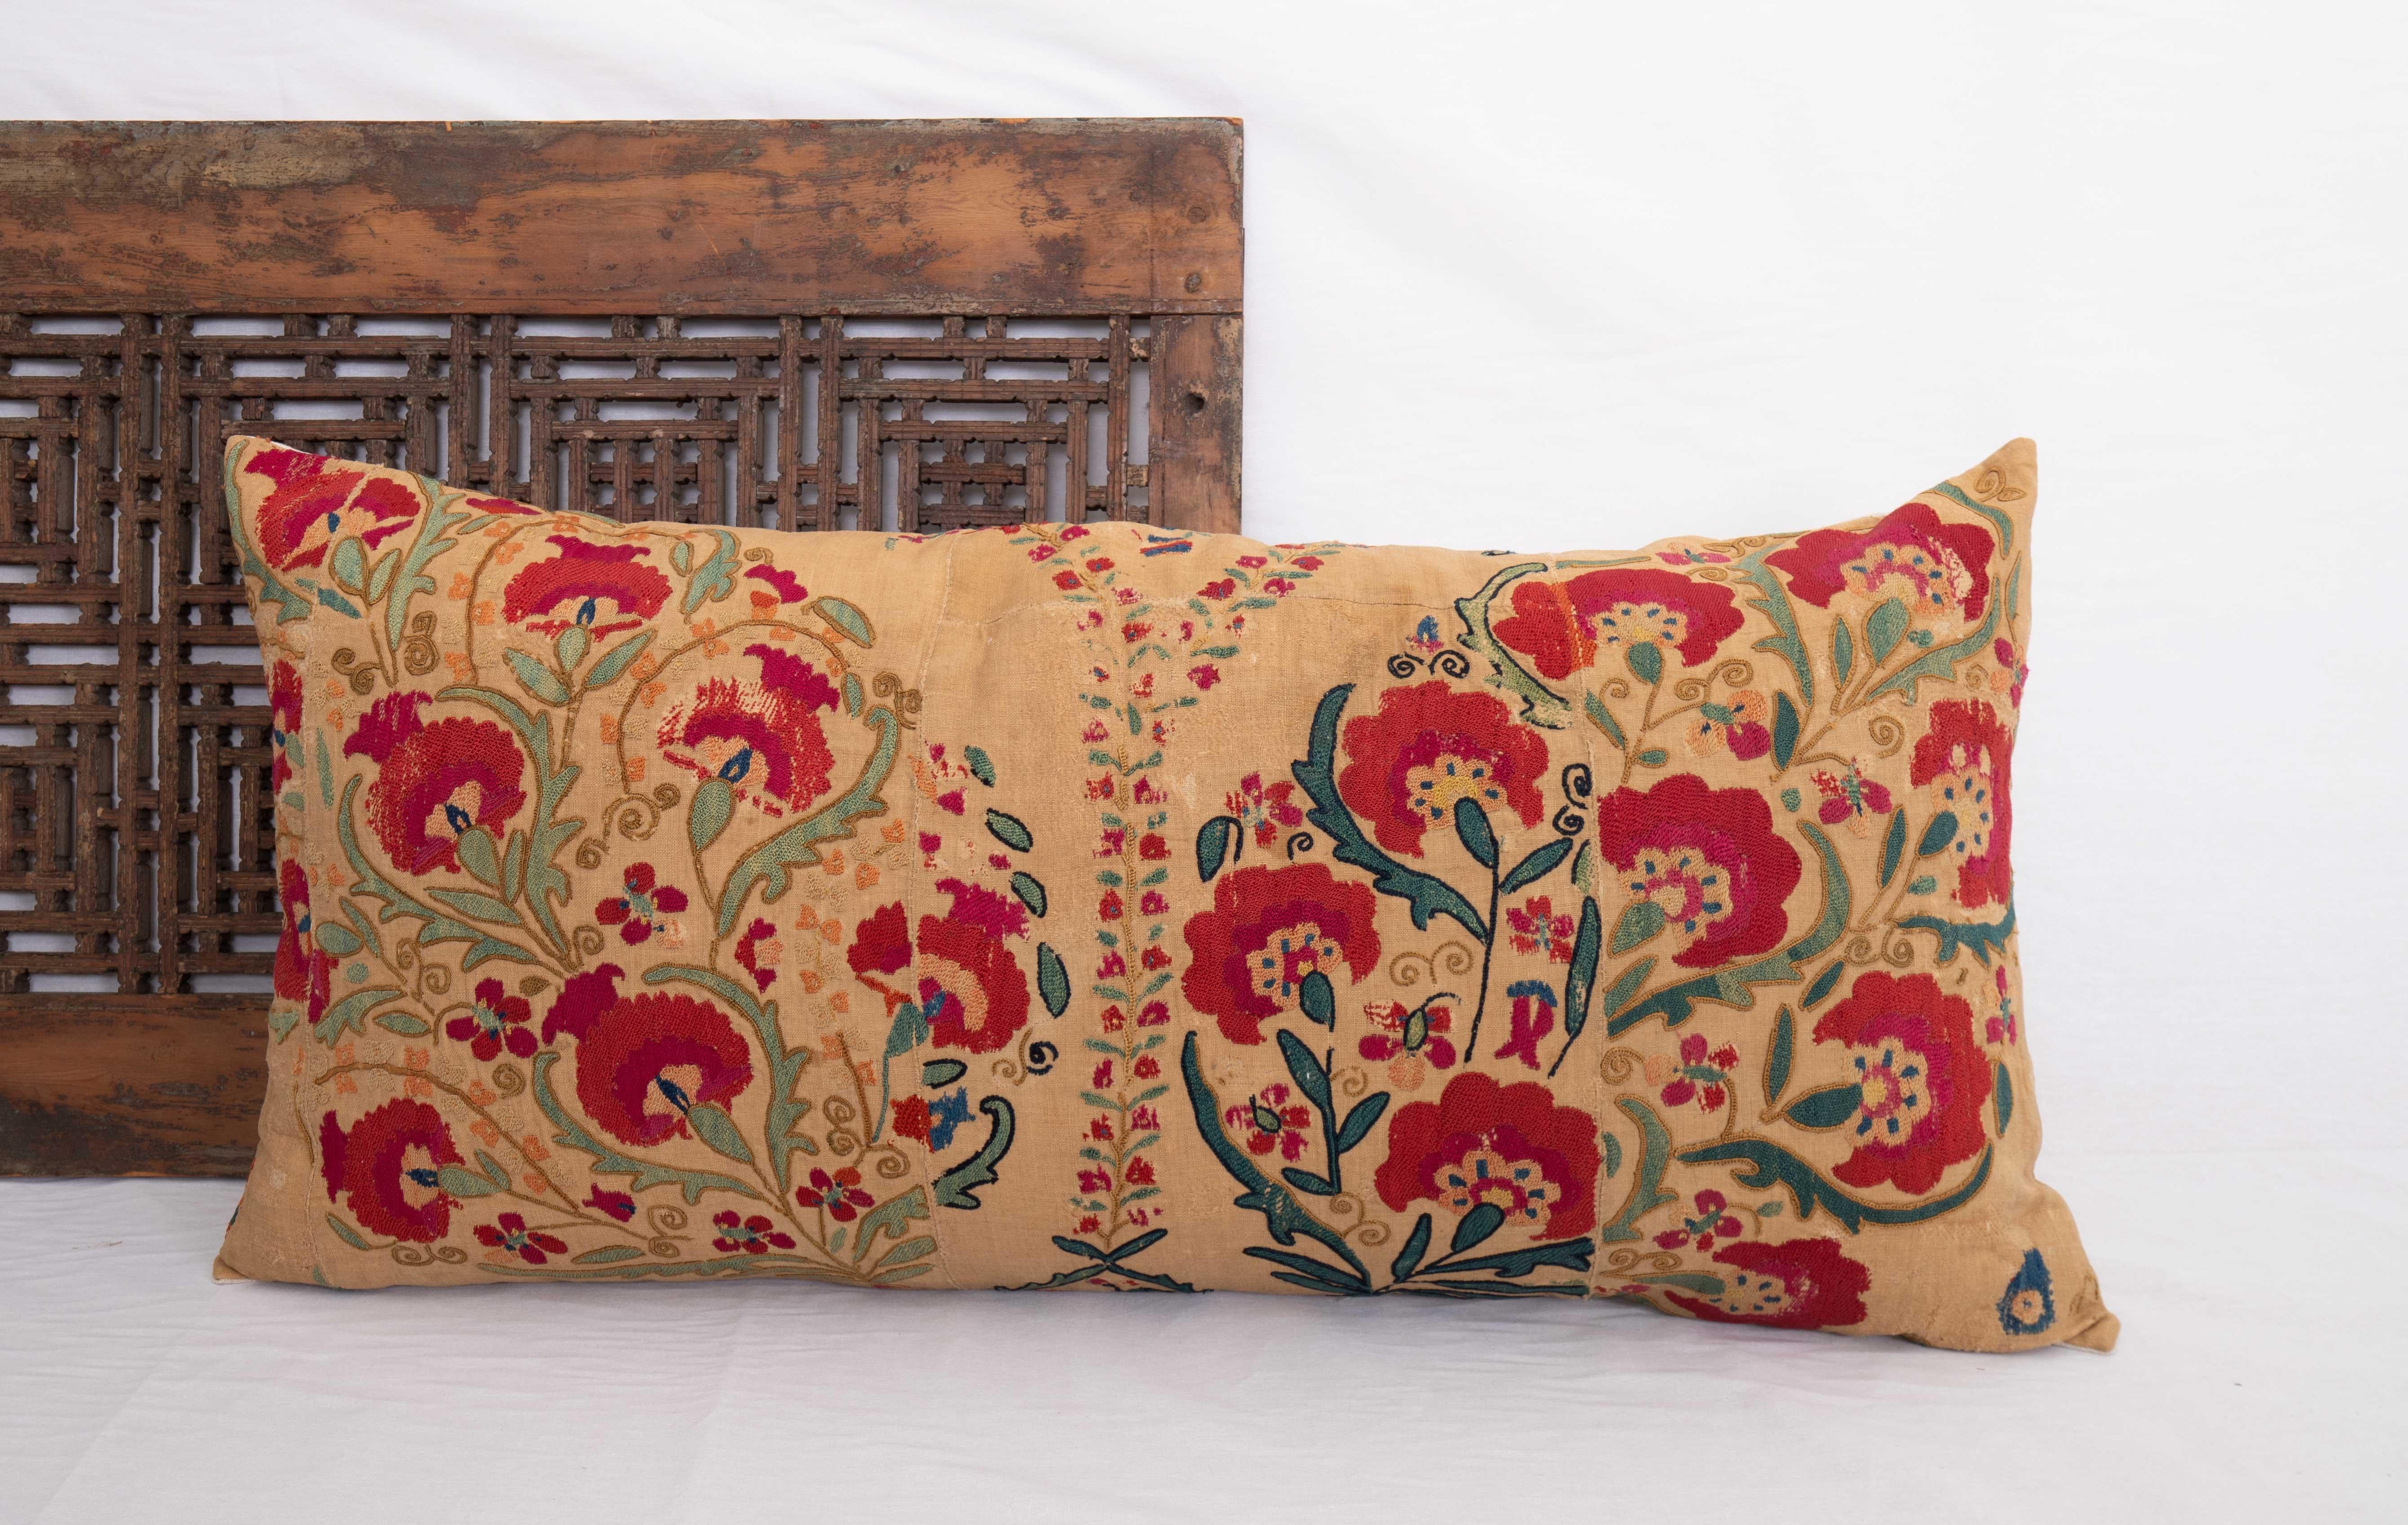 19th Century Suzani Pillow Case made from an Antique suzani Fragment, 19th C.